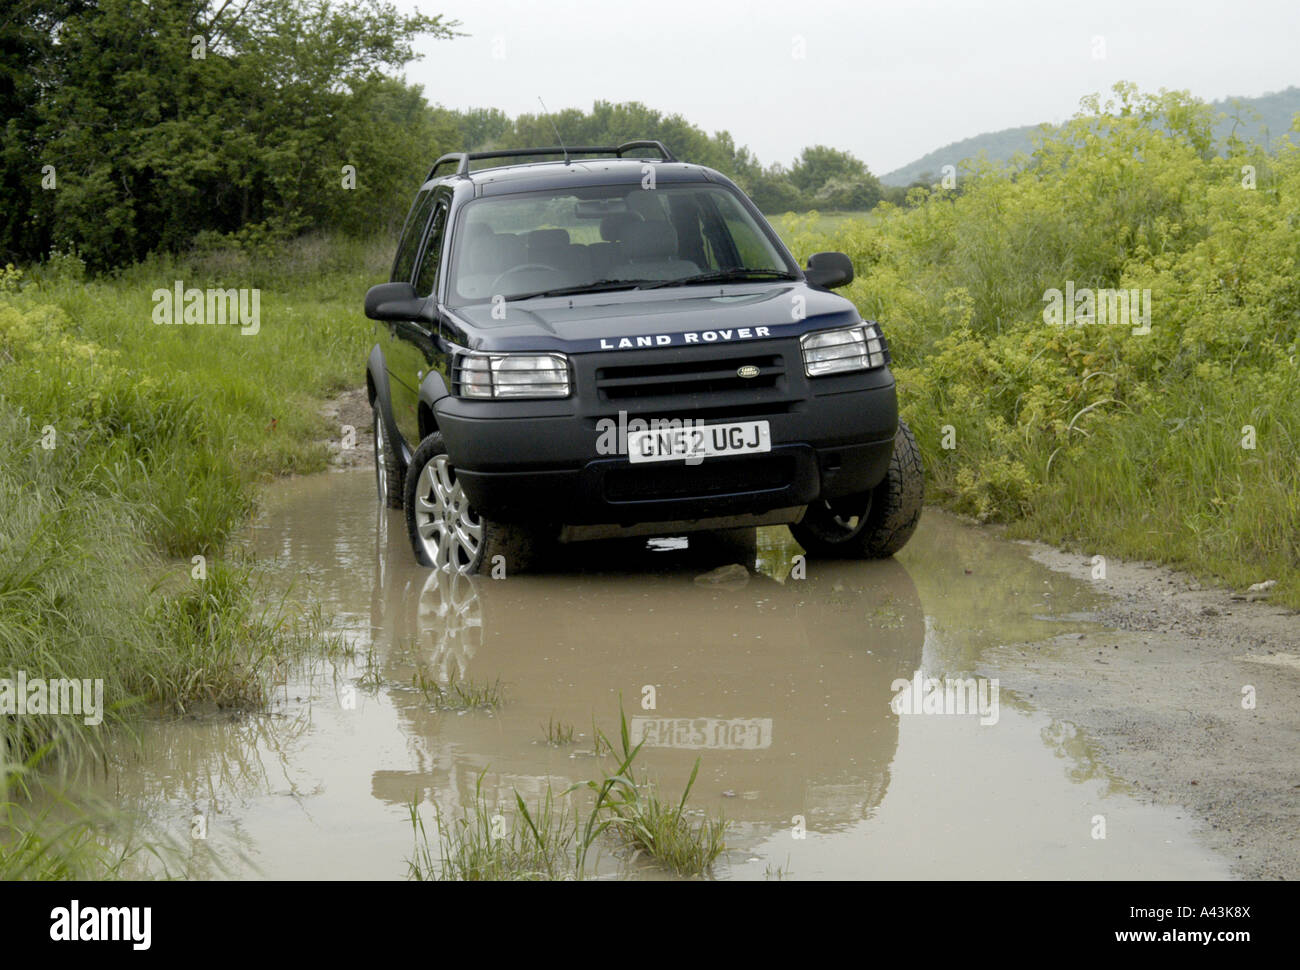 Land Rover Freelander stopped in water Stock Photo